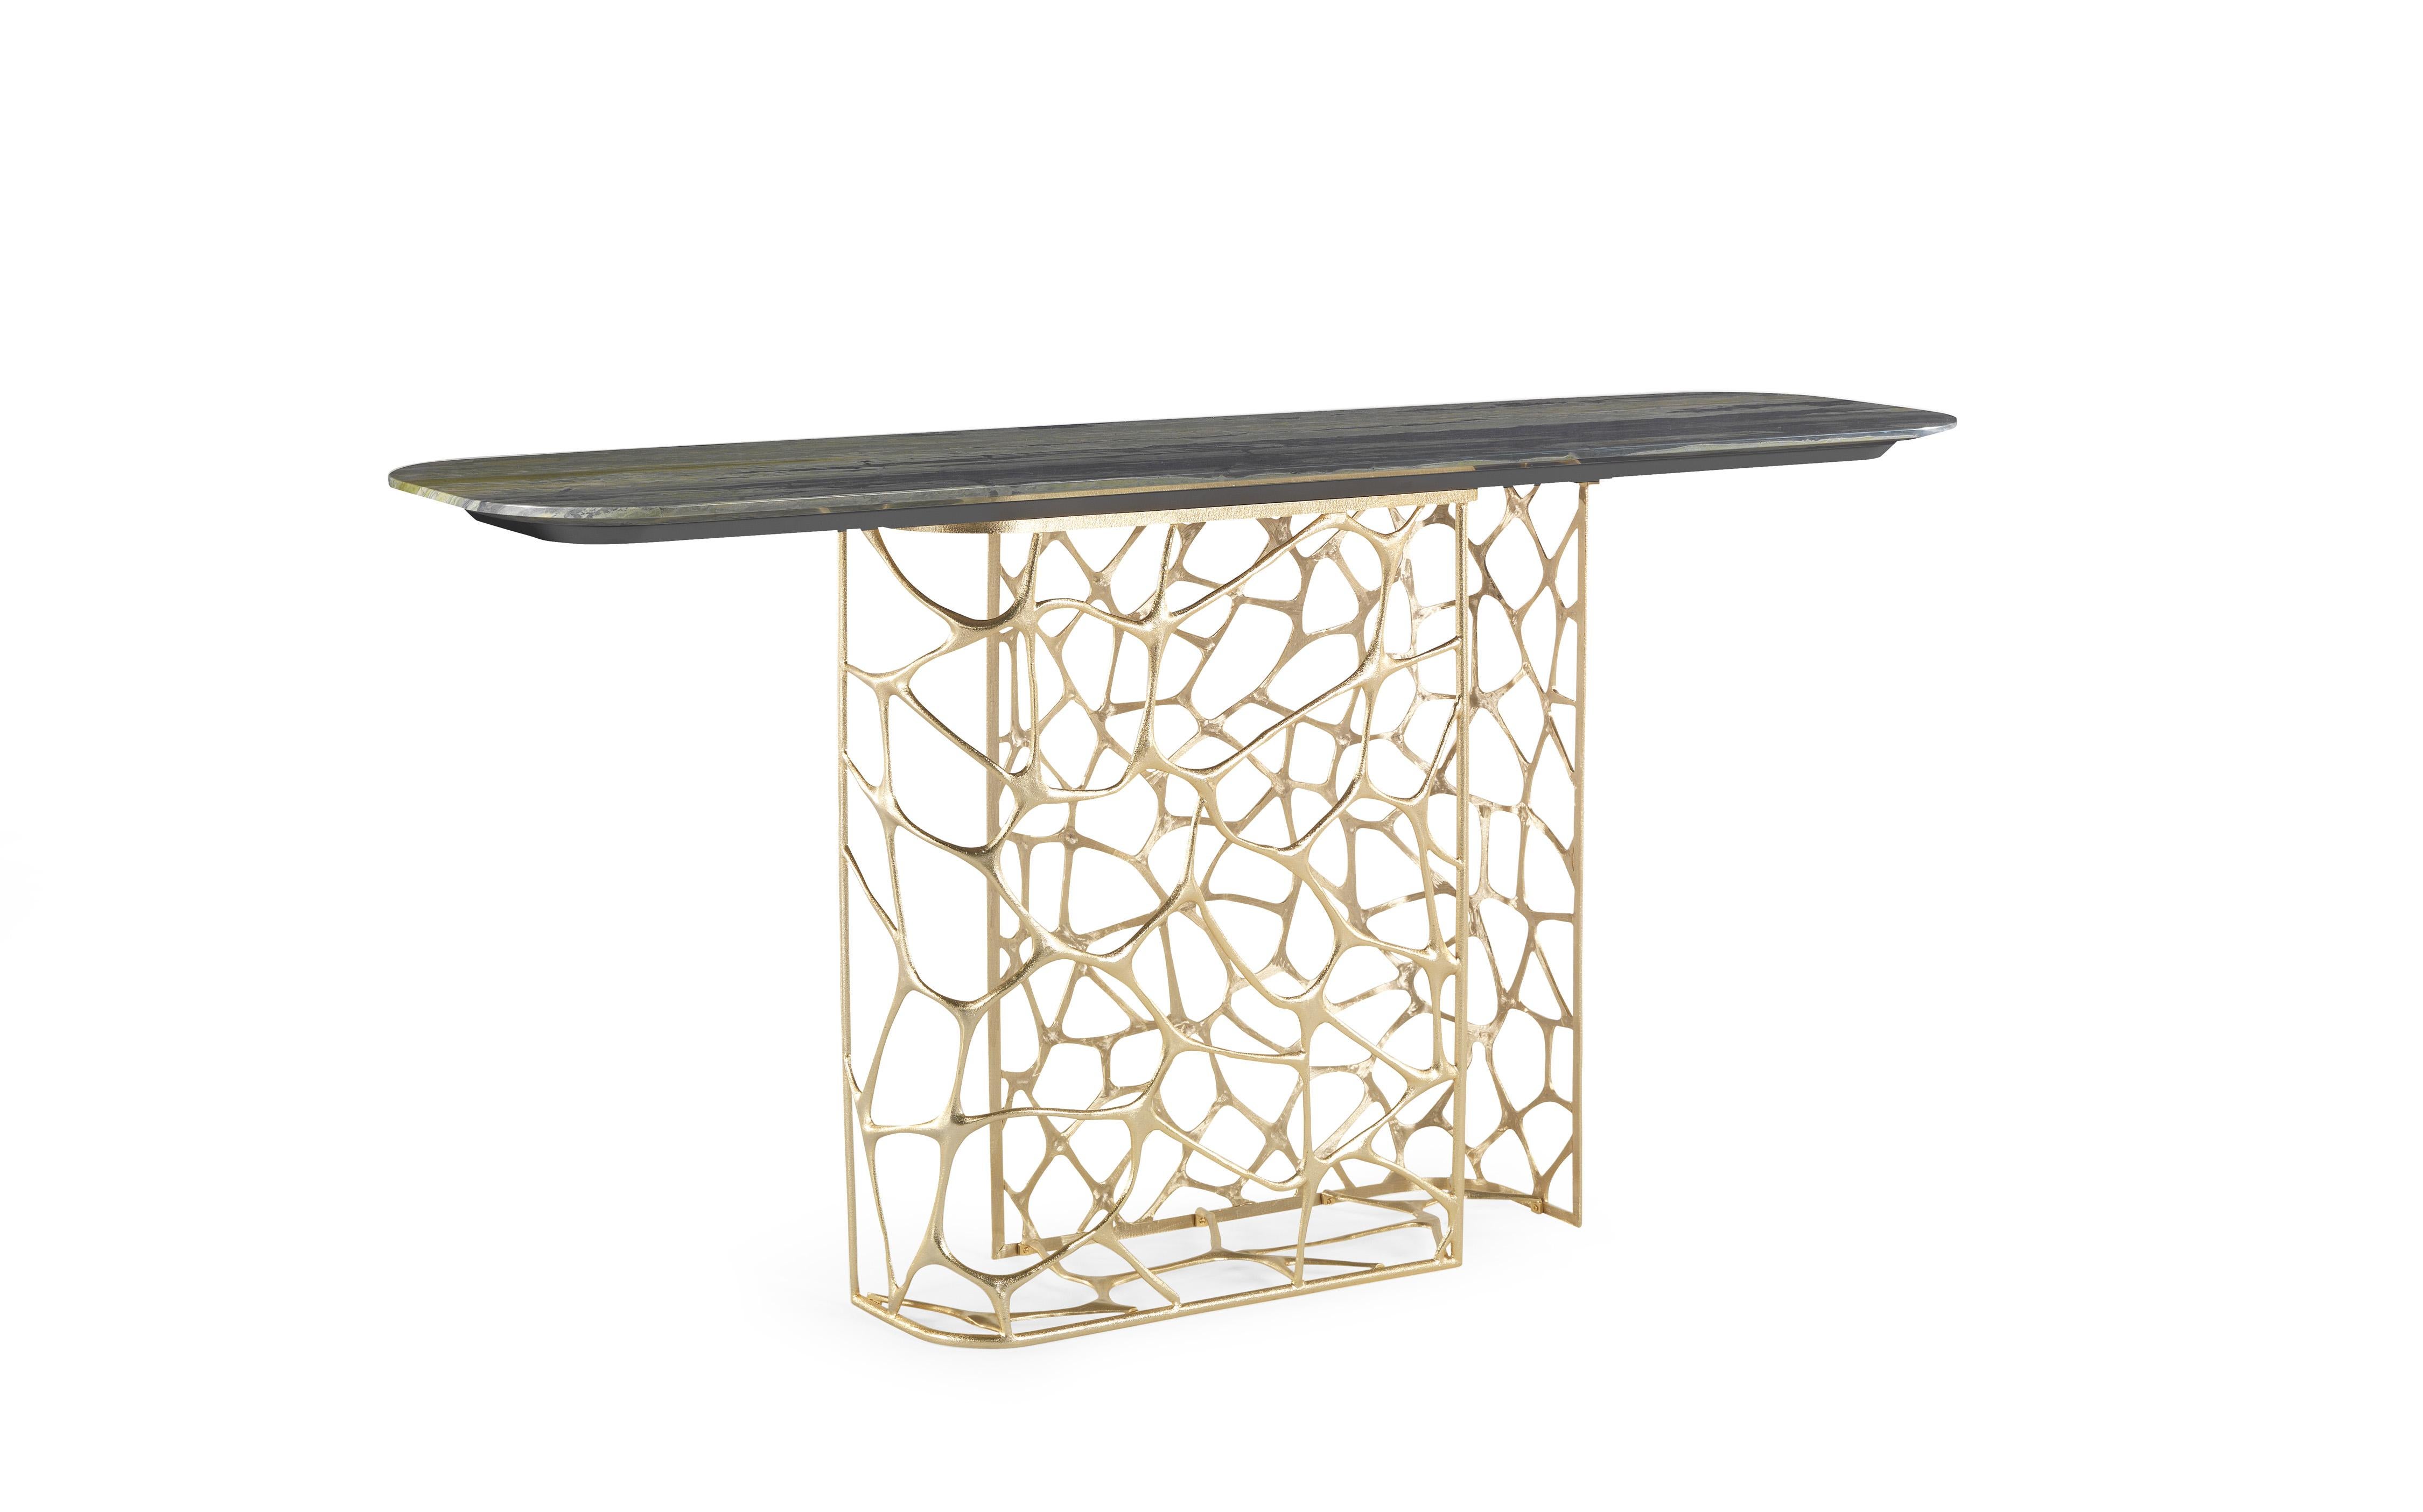 The distinctive element of Sioraf console is undoubtedly the base made of cast brass hand-chiseled by an expert craftsman and gold-plated, whose design recalls the giraffe pattern, typical of the brand. A piece of furniture that boasts a special